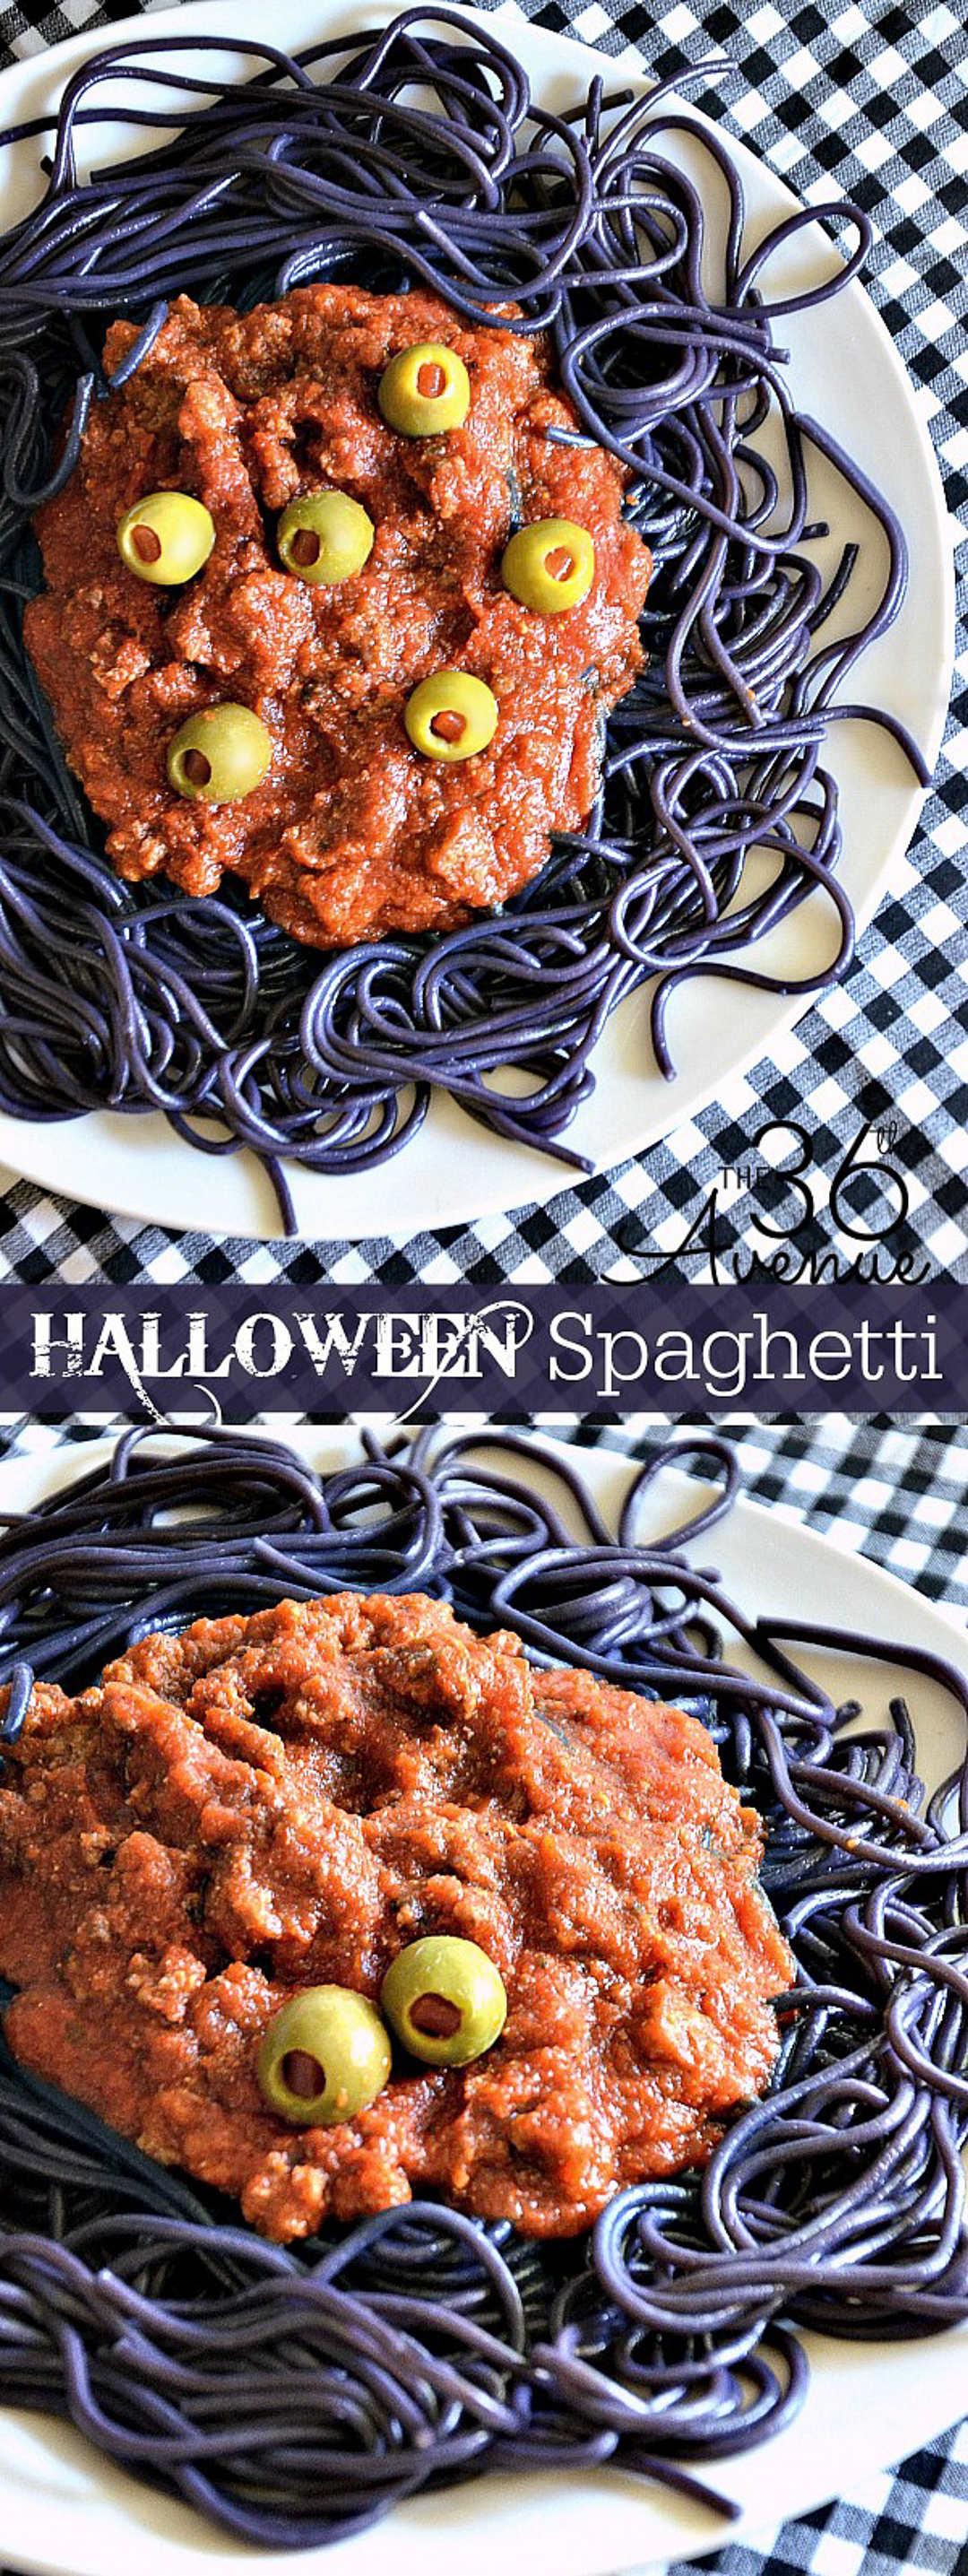 Creepy Halloween spaghetti on a plate with dyed purple spaghetti and marinara sauce with two green olives on top as eyes.